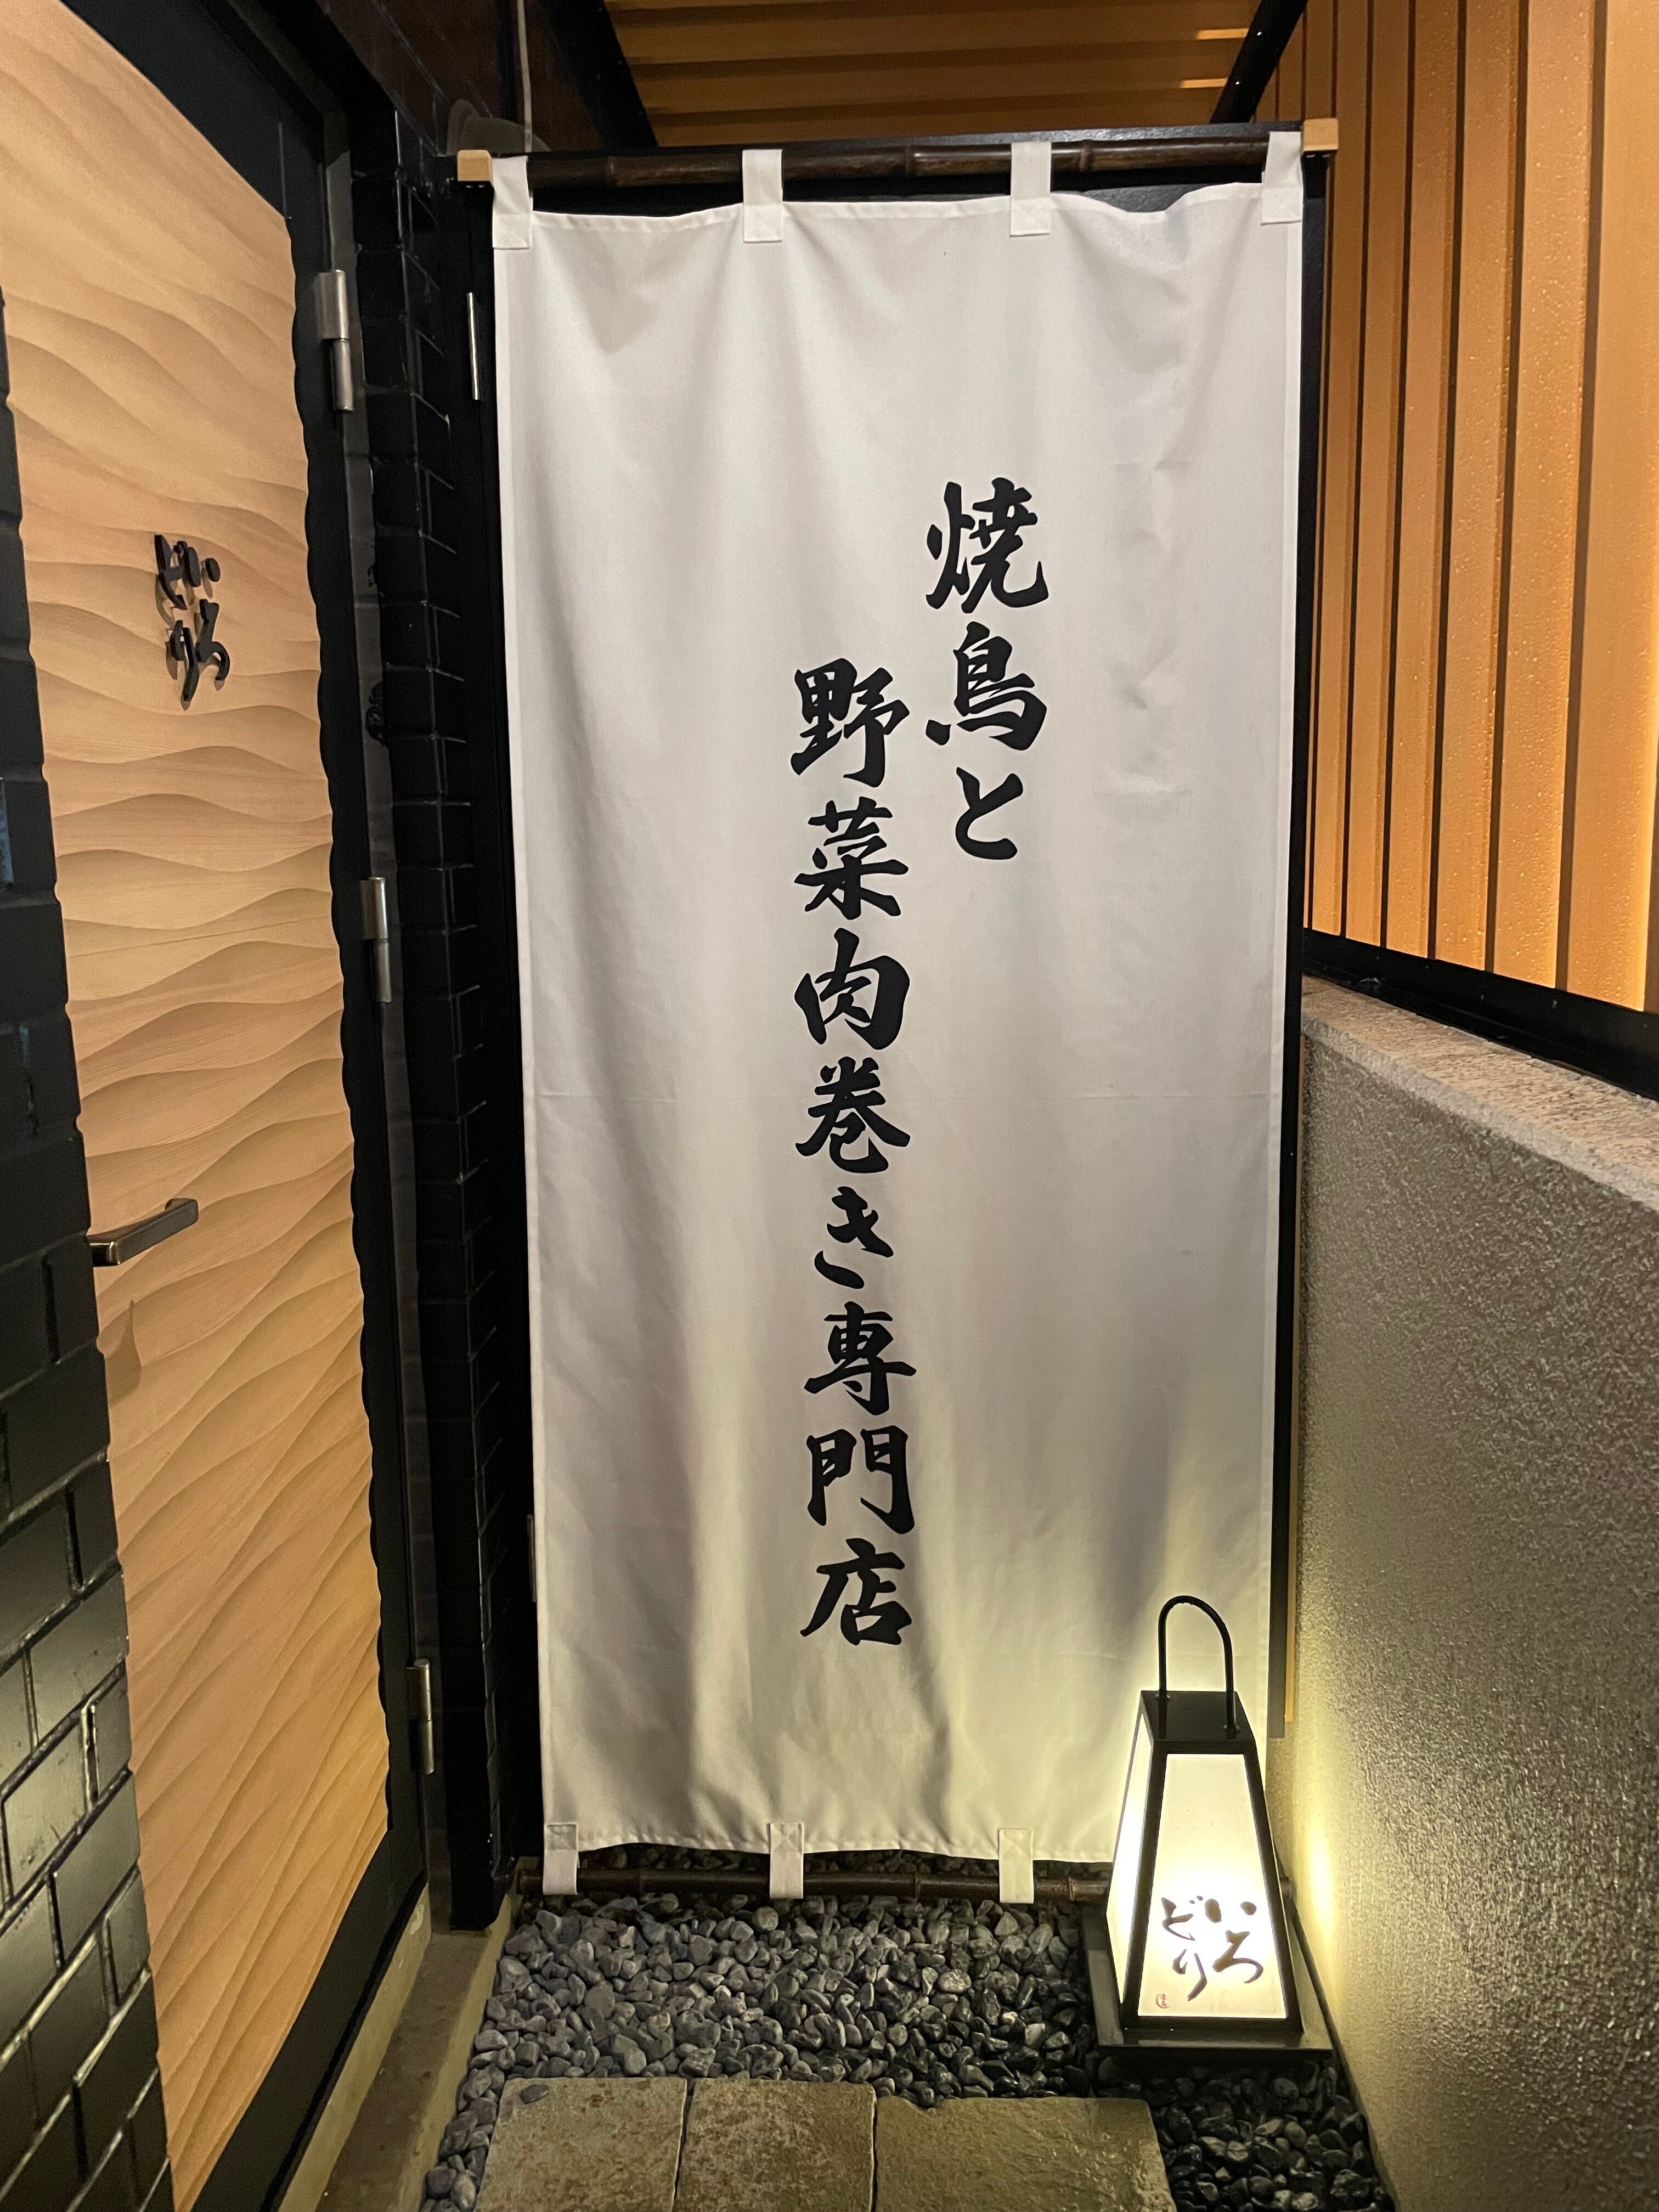 Snsで おしゃれ居酒屋 として話題 いろどり 恵比寿店に行ってきました Spark 活動報告 Spark Note